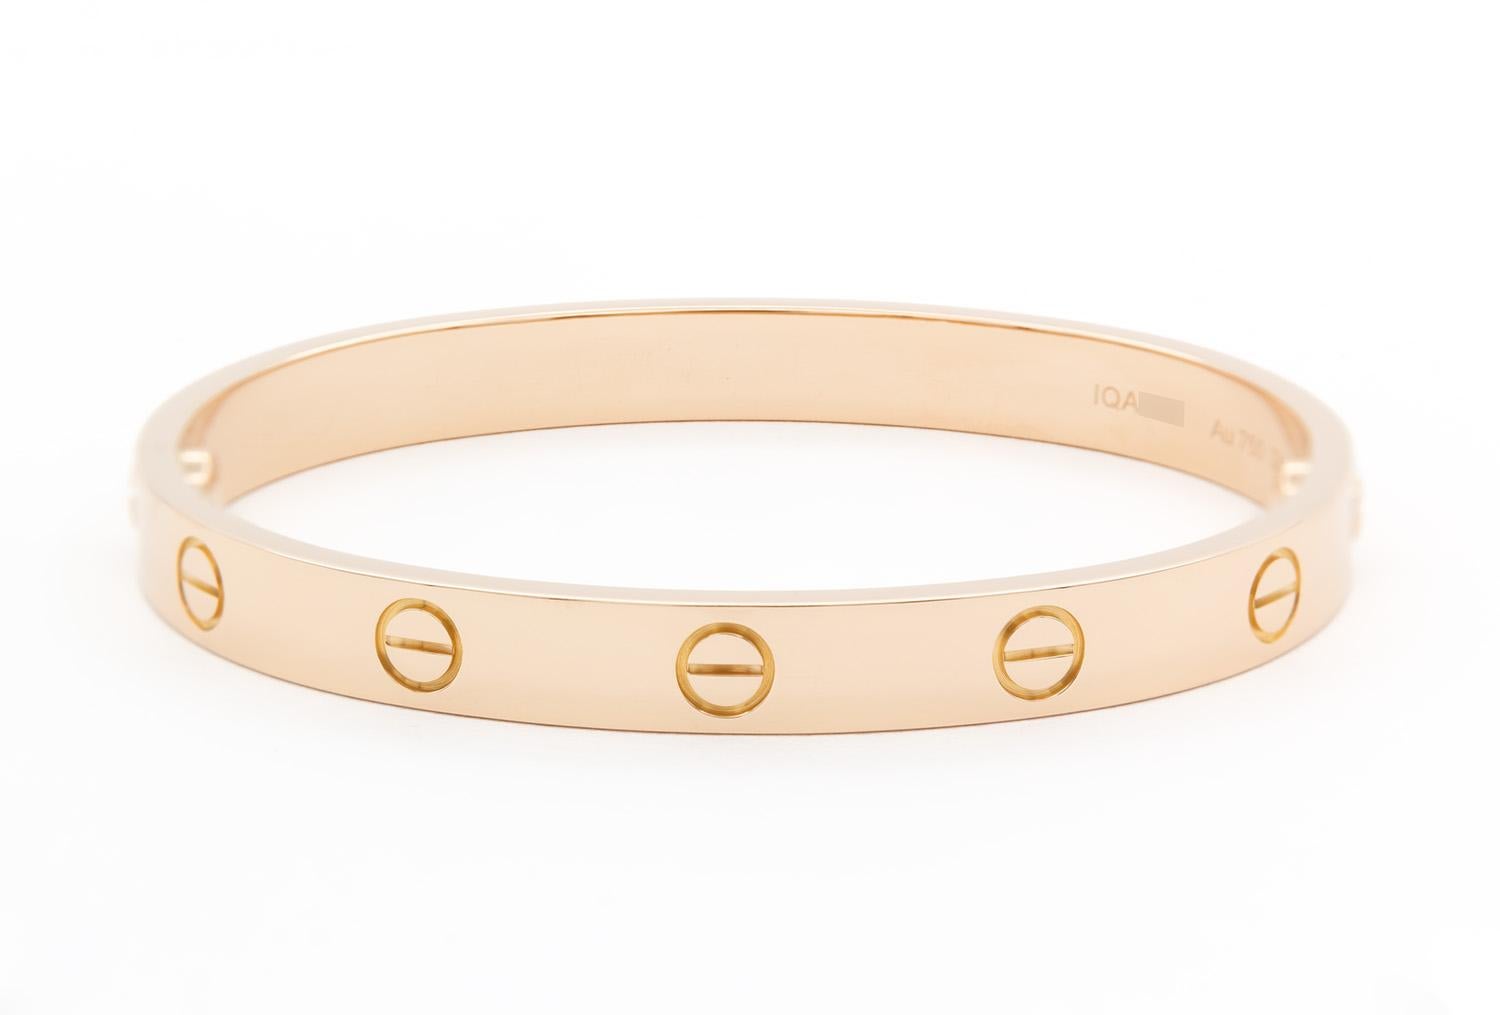 Contemporary Cartier 18K Rose Gold Love Bangle Bracelet Size 16 Box & Papers New Screw System